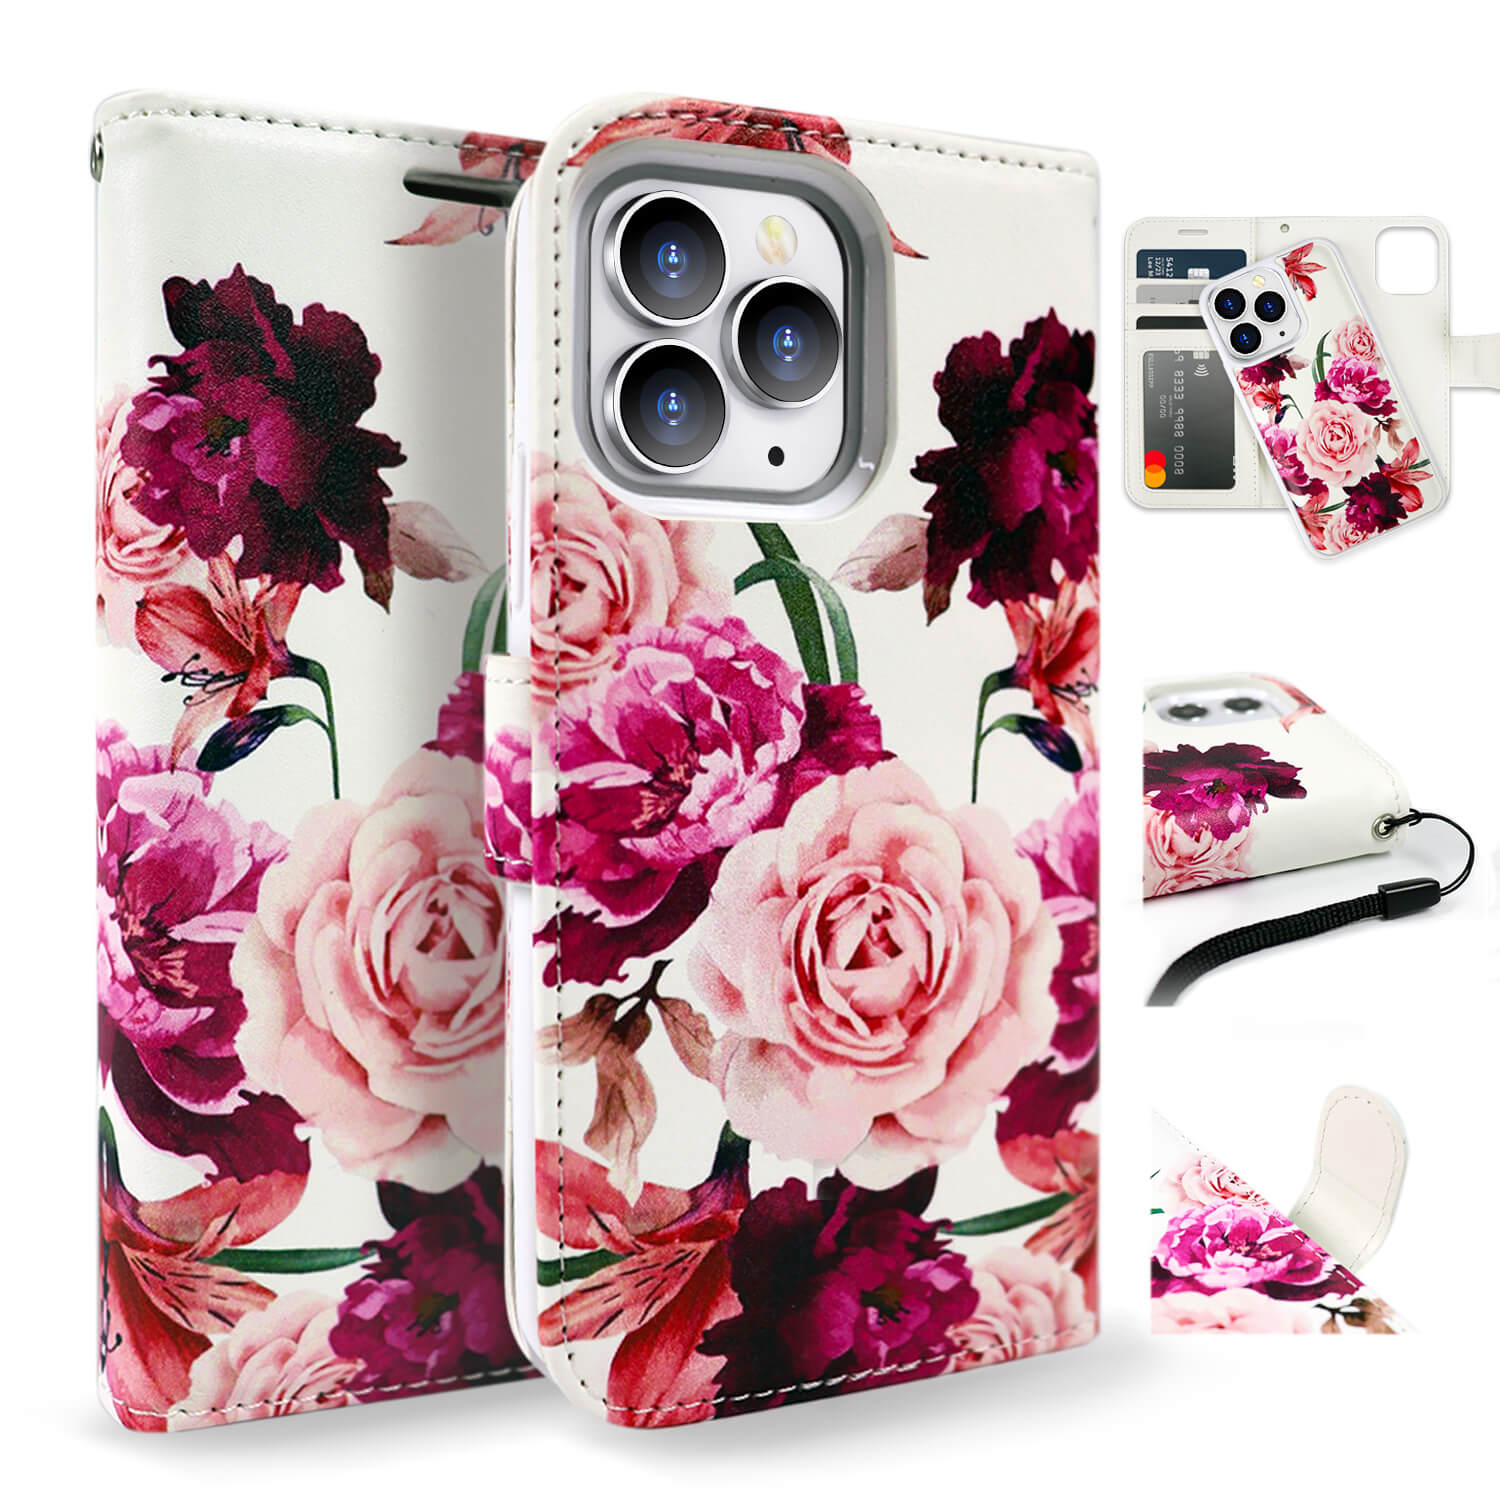 Tough On iPhone 12 Pro Max Case Magnetic Detachable Leather Rose Flower